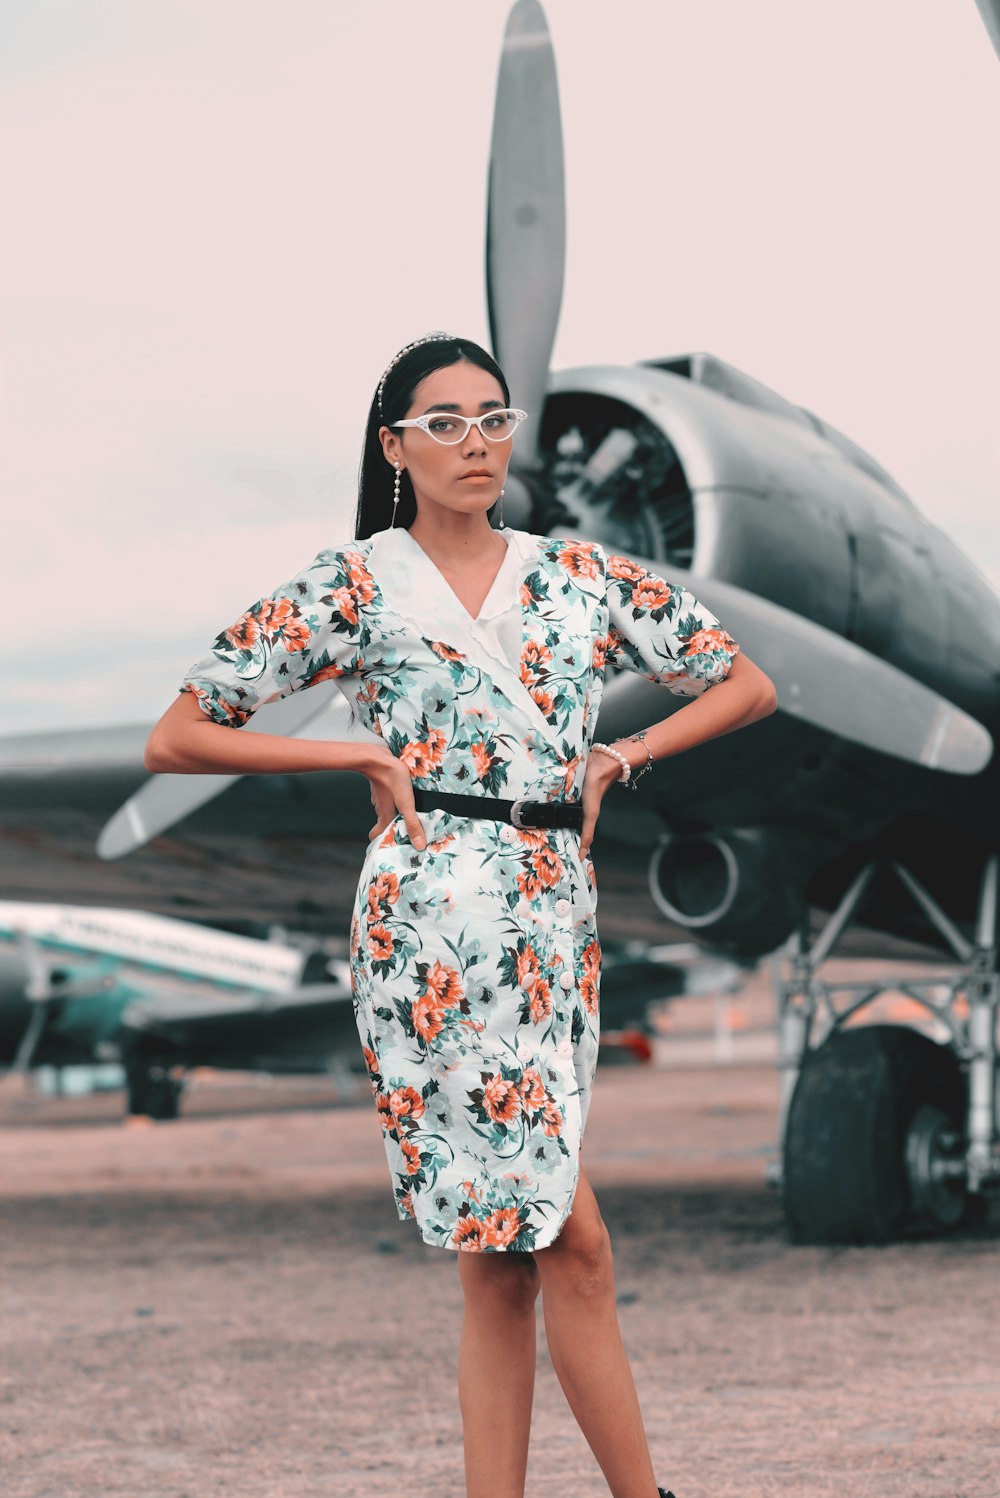 woman in white red and blue floral dress standing near airplane